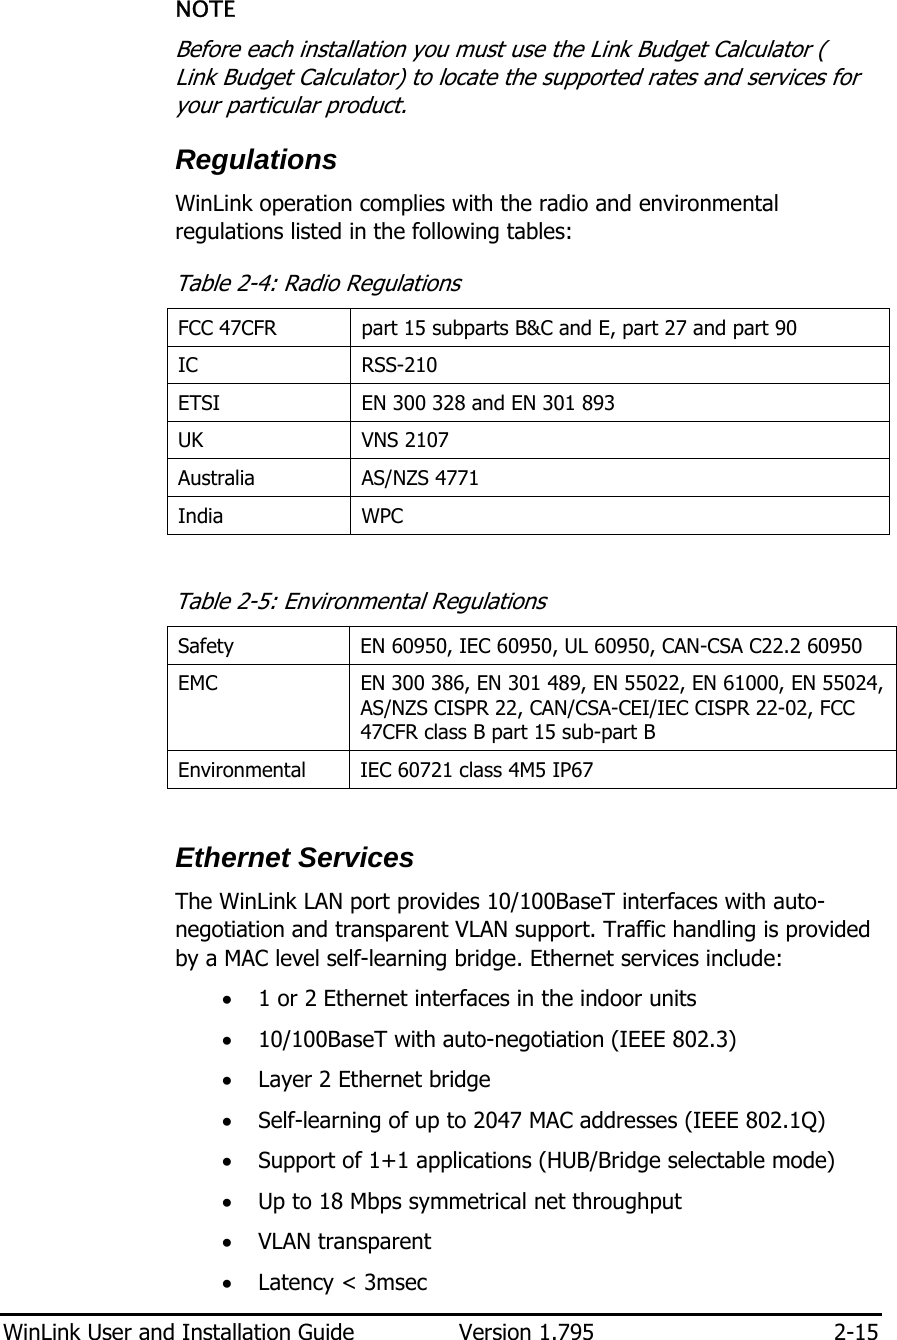  WinLink User and Installation Guide  Version 1.795  2-15  NOTE Before each installation you must use the Link Budget Calculator ( Link Budget Calculator) to locate the supported rates and services for your particular product. Regulations WinLink operation complies with the radio and environmental regulations listed in the following tables: Table  2-4: Radio Regulations FCC 47CFR  part 15 subparts B&amp;C and E, part 27 and part 90  IC RSS-210 ETSI  EN 300 328 and EN 301 893  UK VNS 2107 Australia AS/NZS 4771 India WPC  Table  2-5: Environmental Regulations Safety  EN 60950, IEC 60950, UL 60950, CAN-CSA C22.2 60950 EMC  EN 300 386, EN 301 489, EN 55022, EN 61000, EN 55024, AS/NZS CISPR 22, CAN/CSA-CEI/IEC CISPR 22-02, FCC 47CFR class B part 15 sub-part B Environmental  IEC 60721 class 4M5 IP67  Ethernet Services The WinLink LAN port provides 10/100BaseT interfaces with auto-negotiation and transparent VLAN support. Traffic handling is provided by a MAC level self-learning bridge. Ethernet services include: • 1 or 2 Ethernet interfaces in the indoor units • 10/100BaseT with auto-negotiation (IEEE 802.3) • Layer 2 Ethernet bridge • Self-learning of up to 2047 MAC addresses (IEEE 802.1Q) • Support of 1+1 applications (HUB/Bridge selectable mode) • Up to 18 Mbps symmetrical net throughput • VLAN transparent • Latency &lt; 3msec 